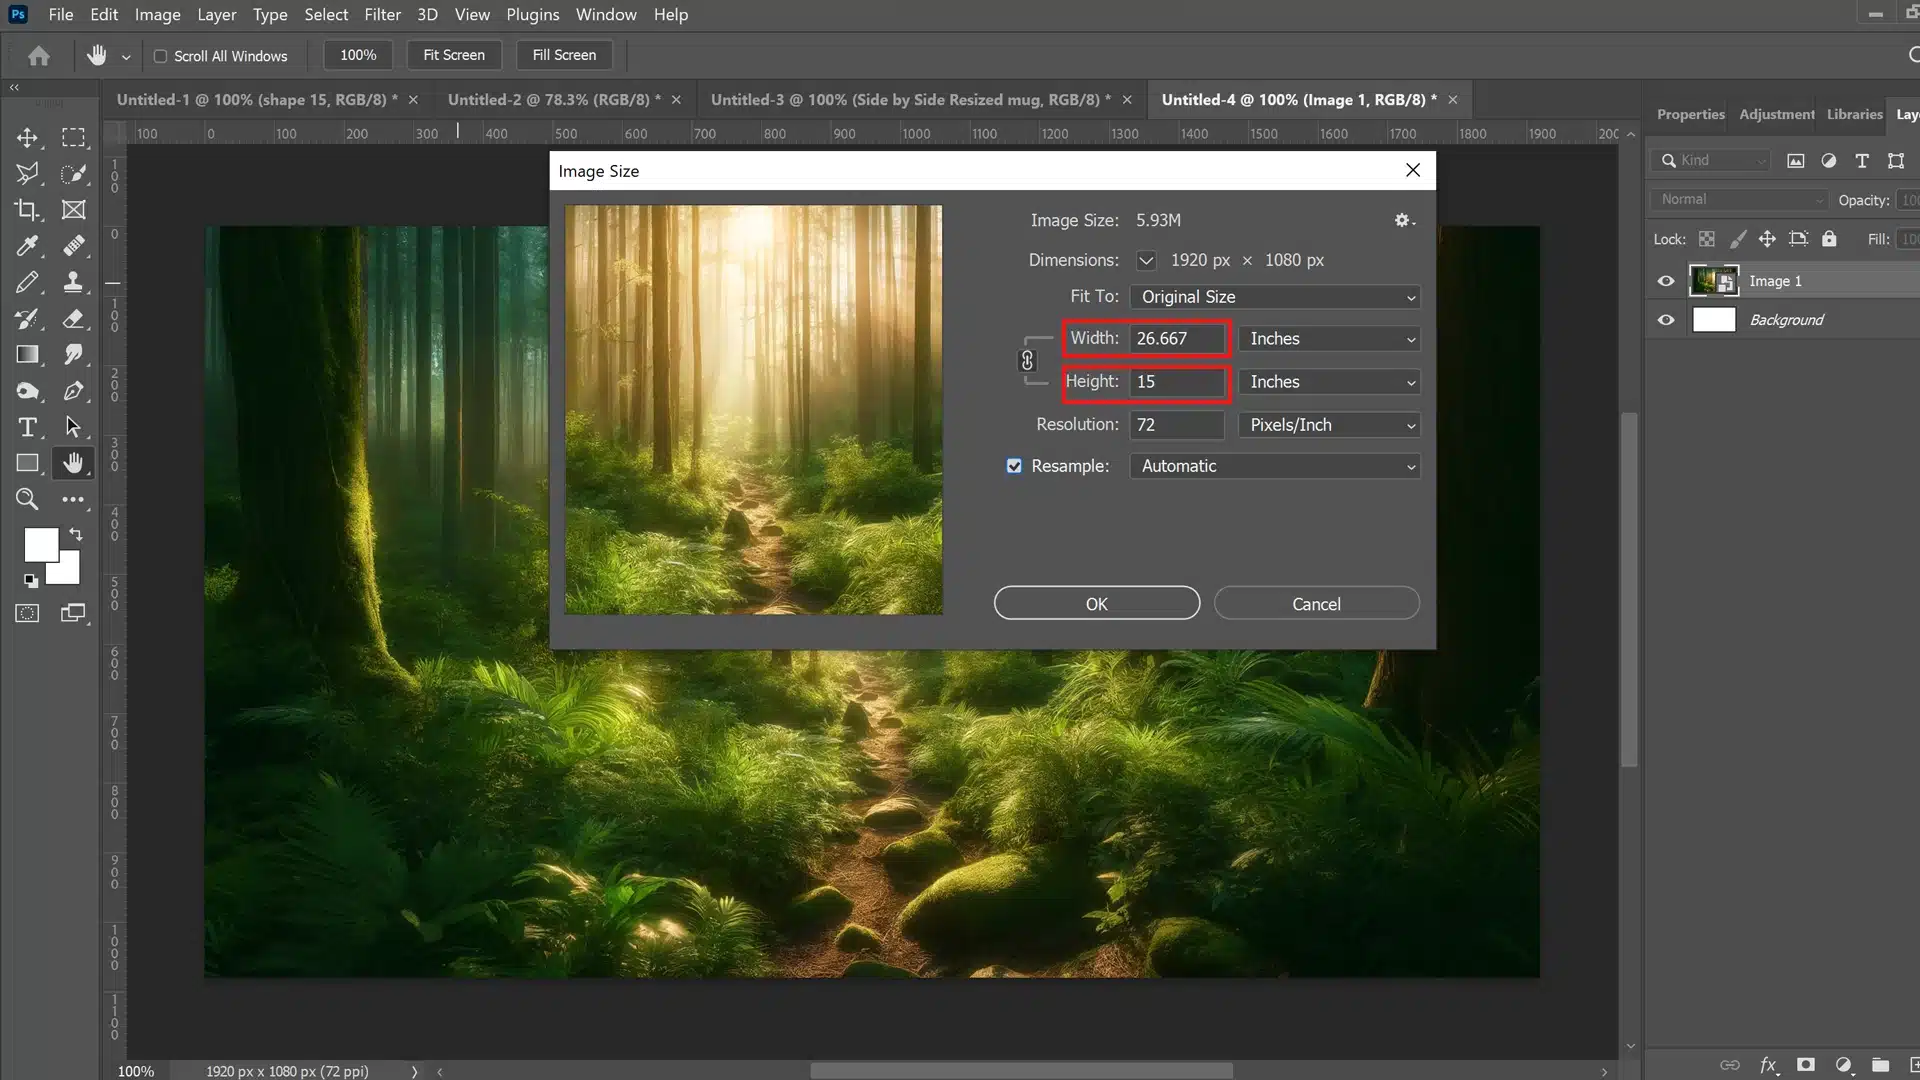 Photo of a Photoshop interface displaying the 'Image Size' dialog box with an open forest scene image in the background, showing a lush, sunlit path through dense greenery.